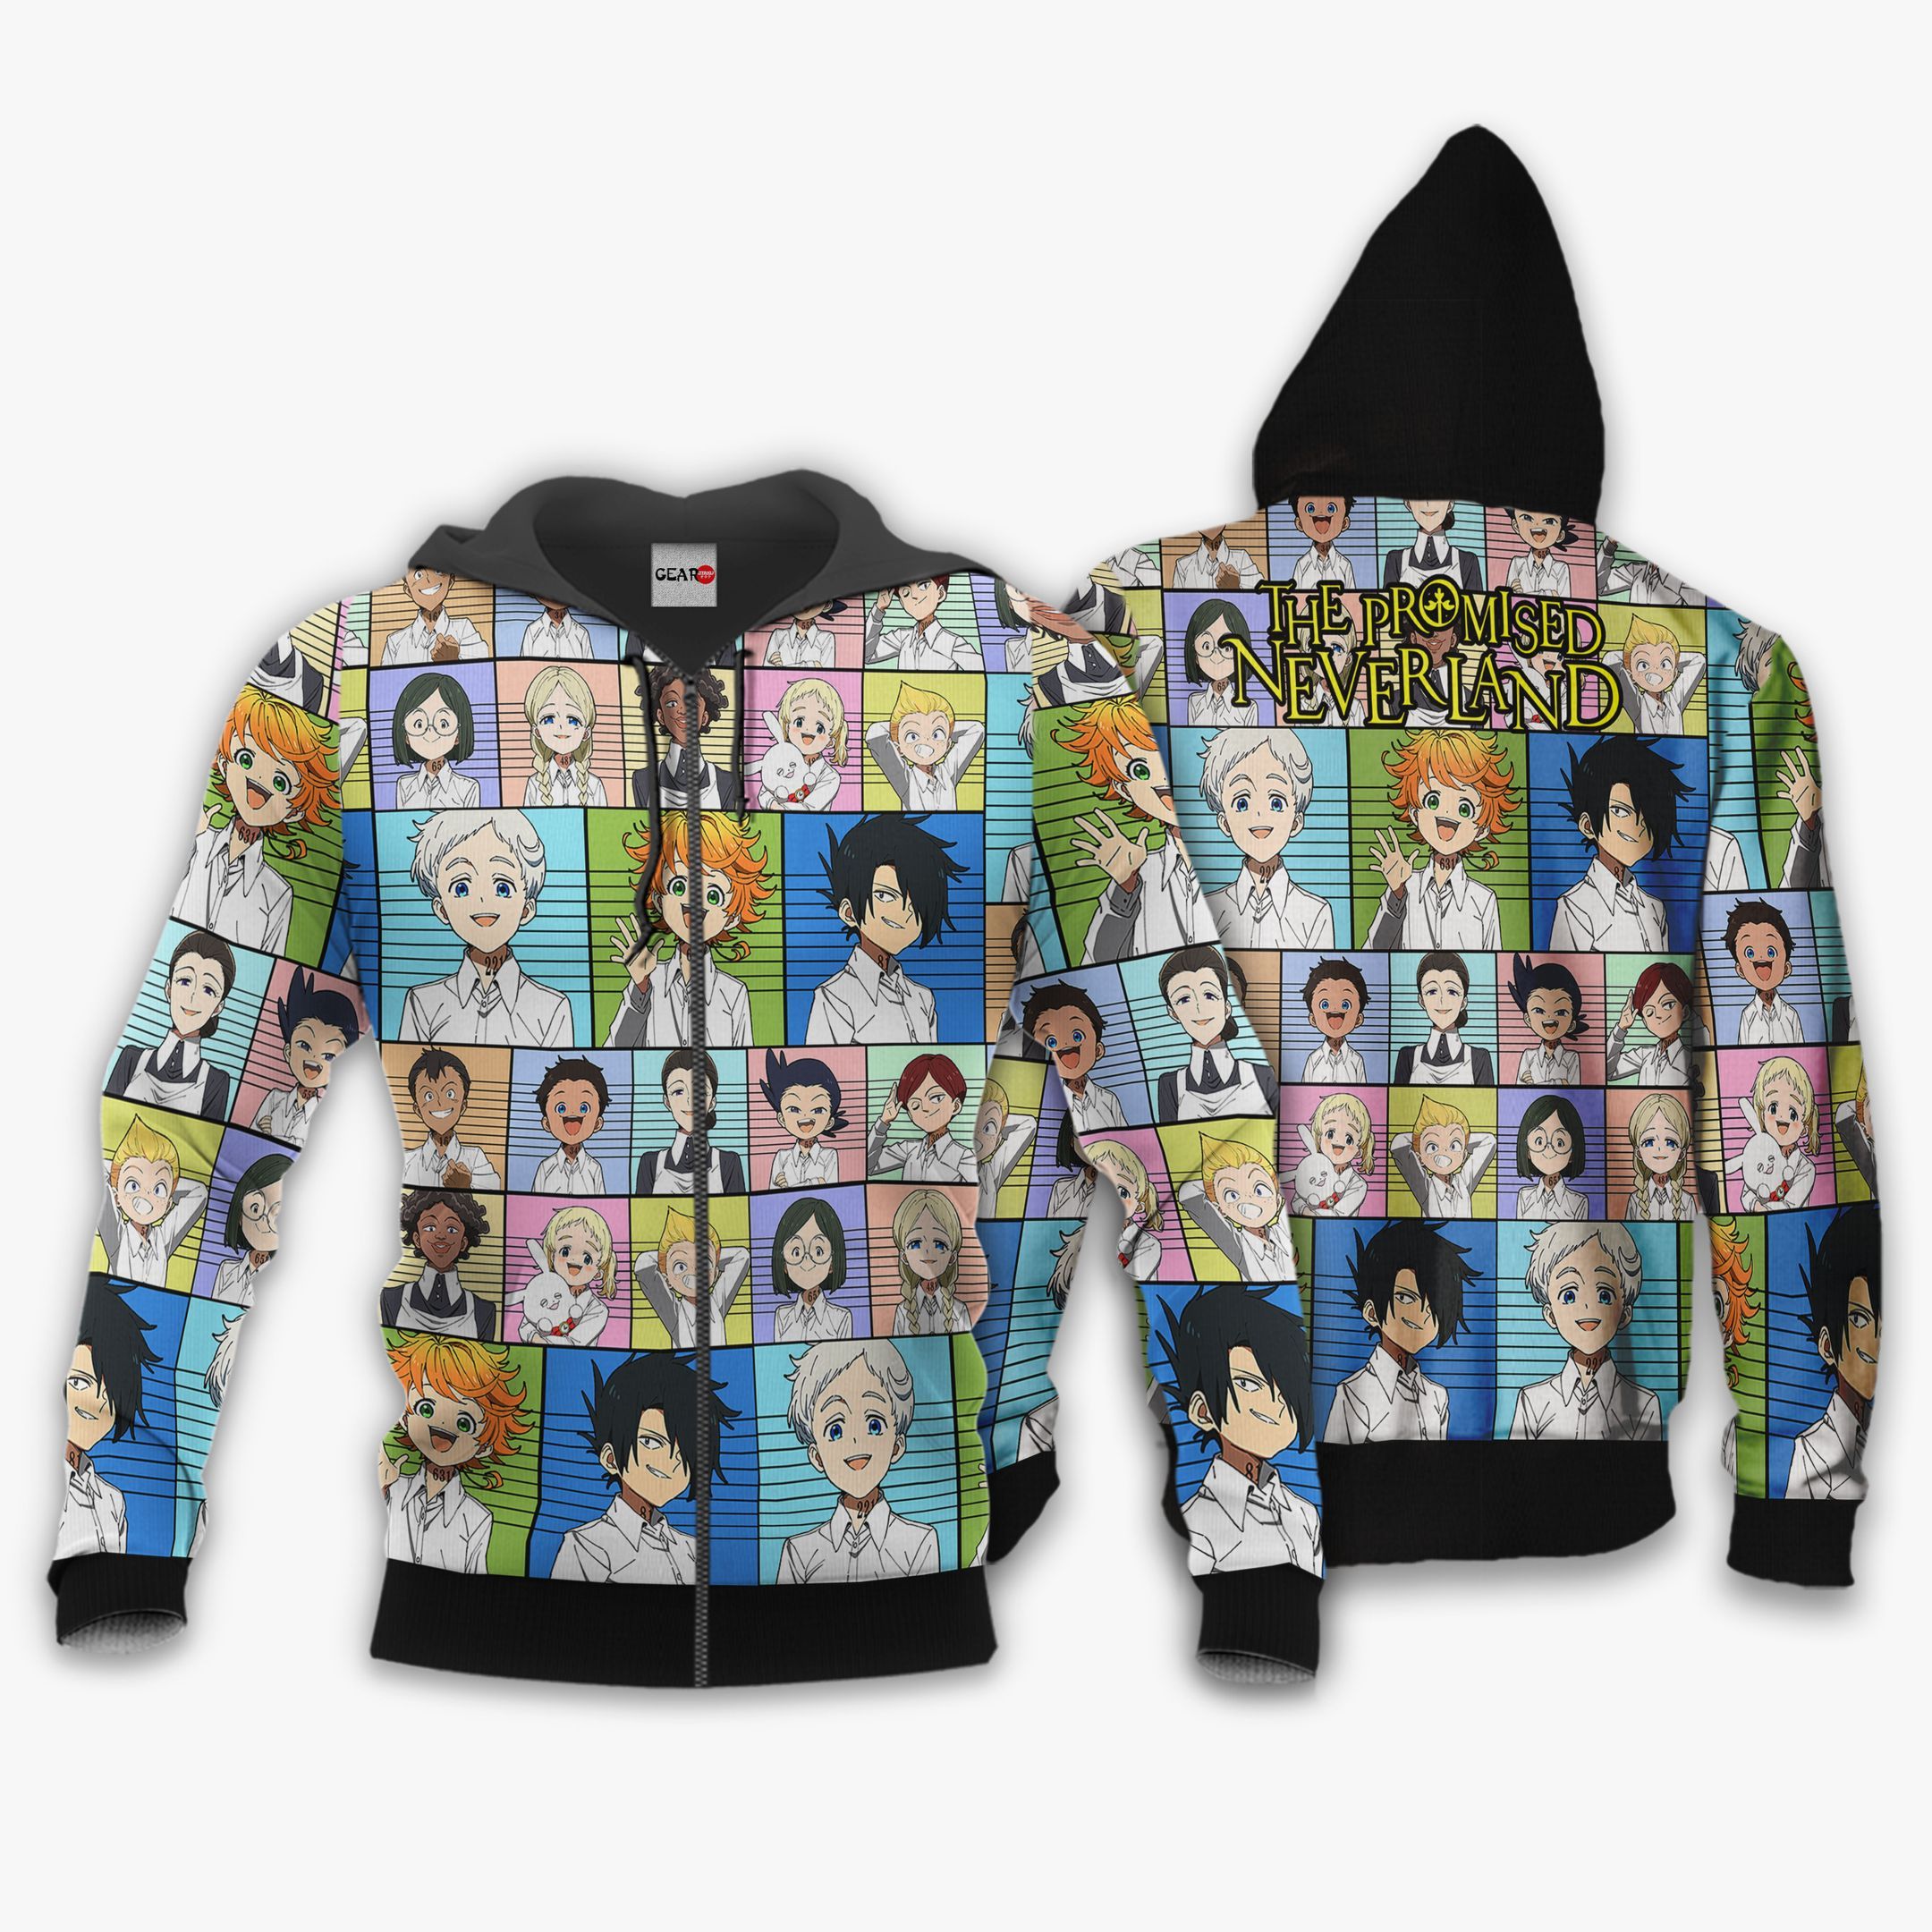 NEW The Promised Neverland Characters Anime Full Printed 3D Sweater, Hoodie1